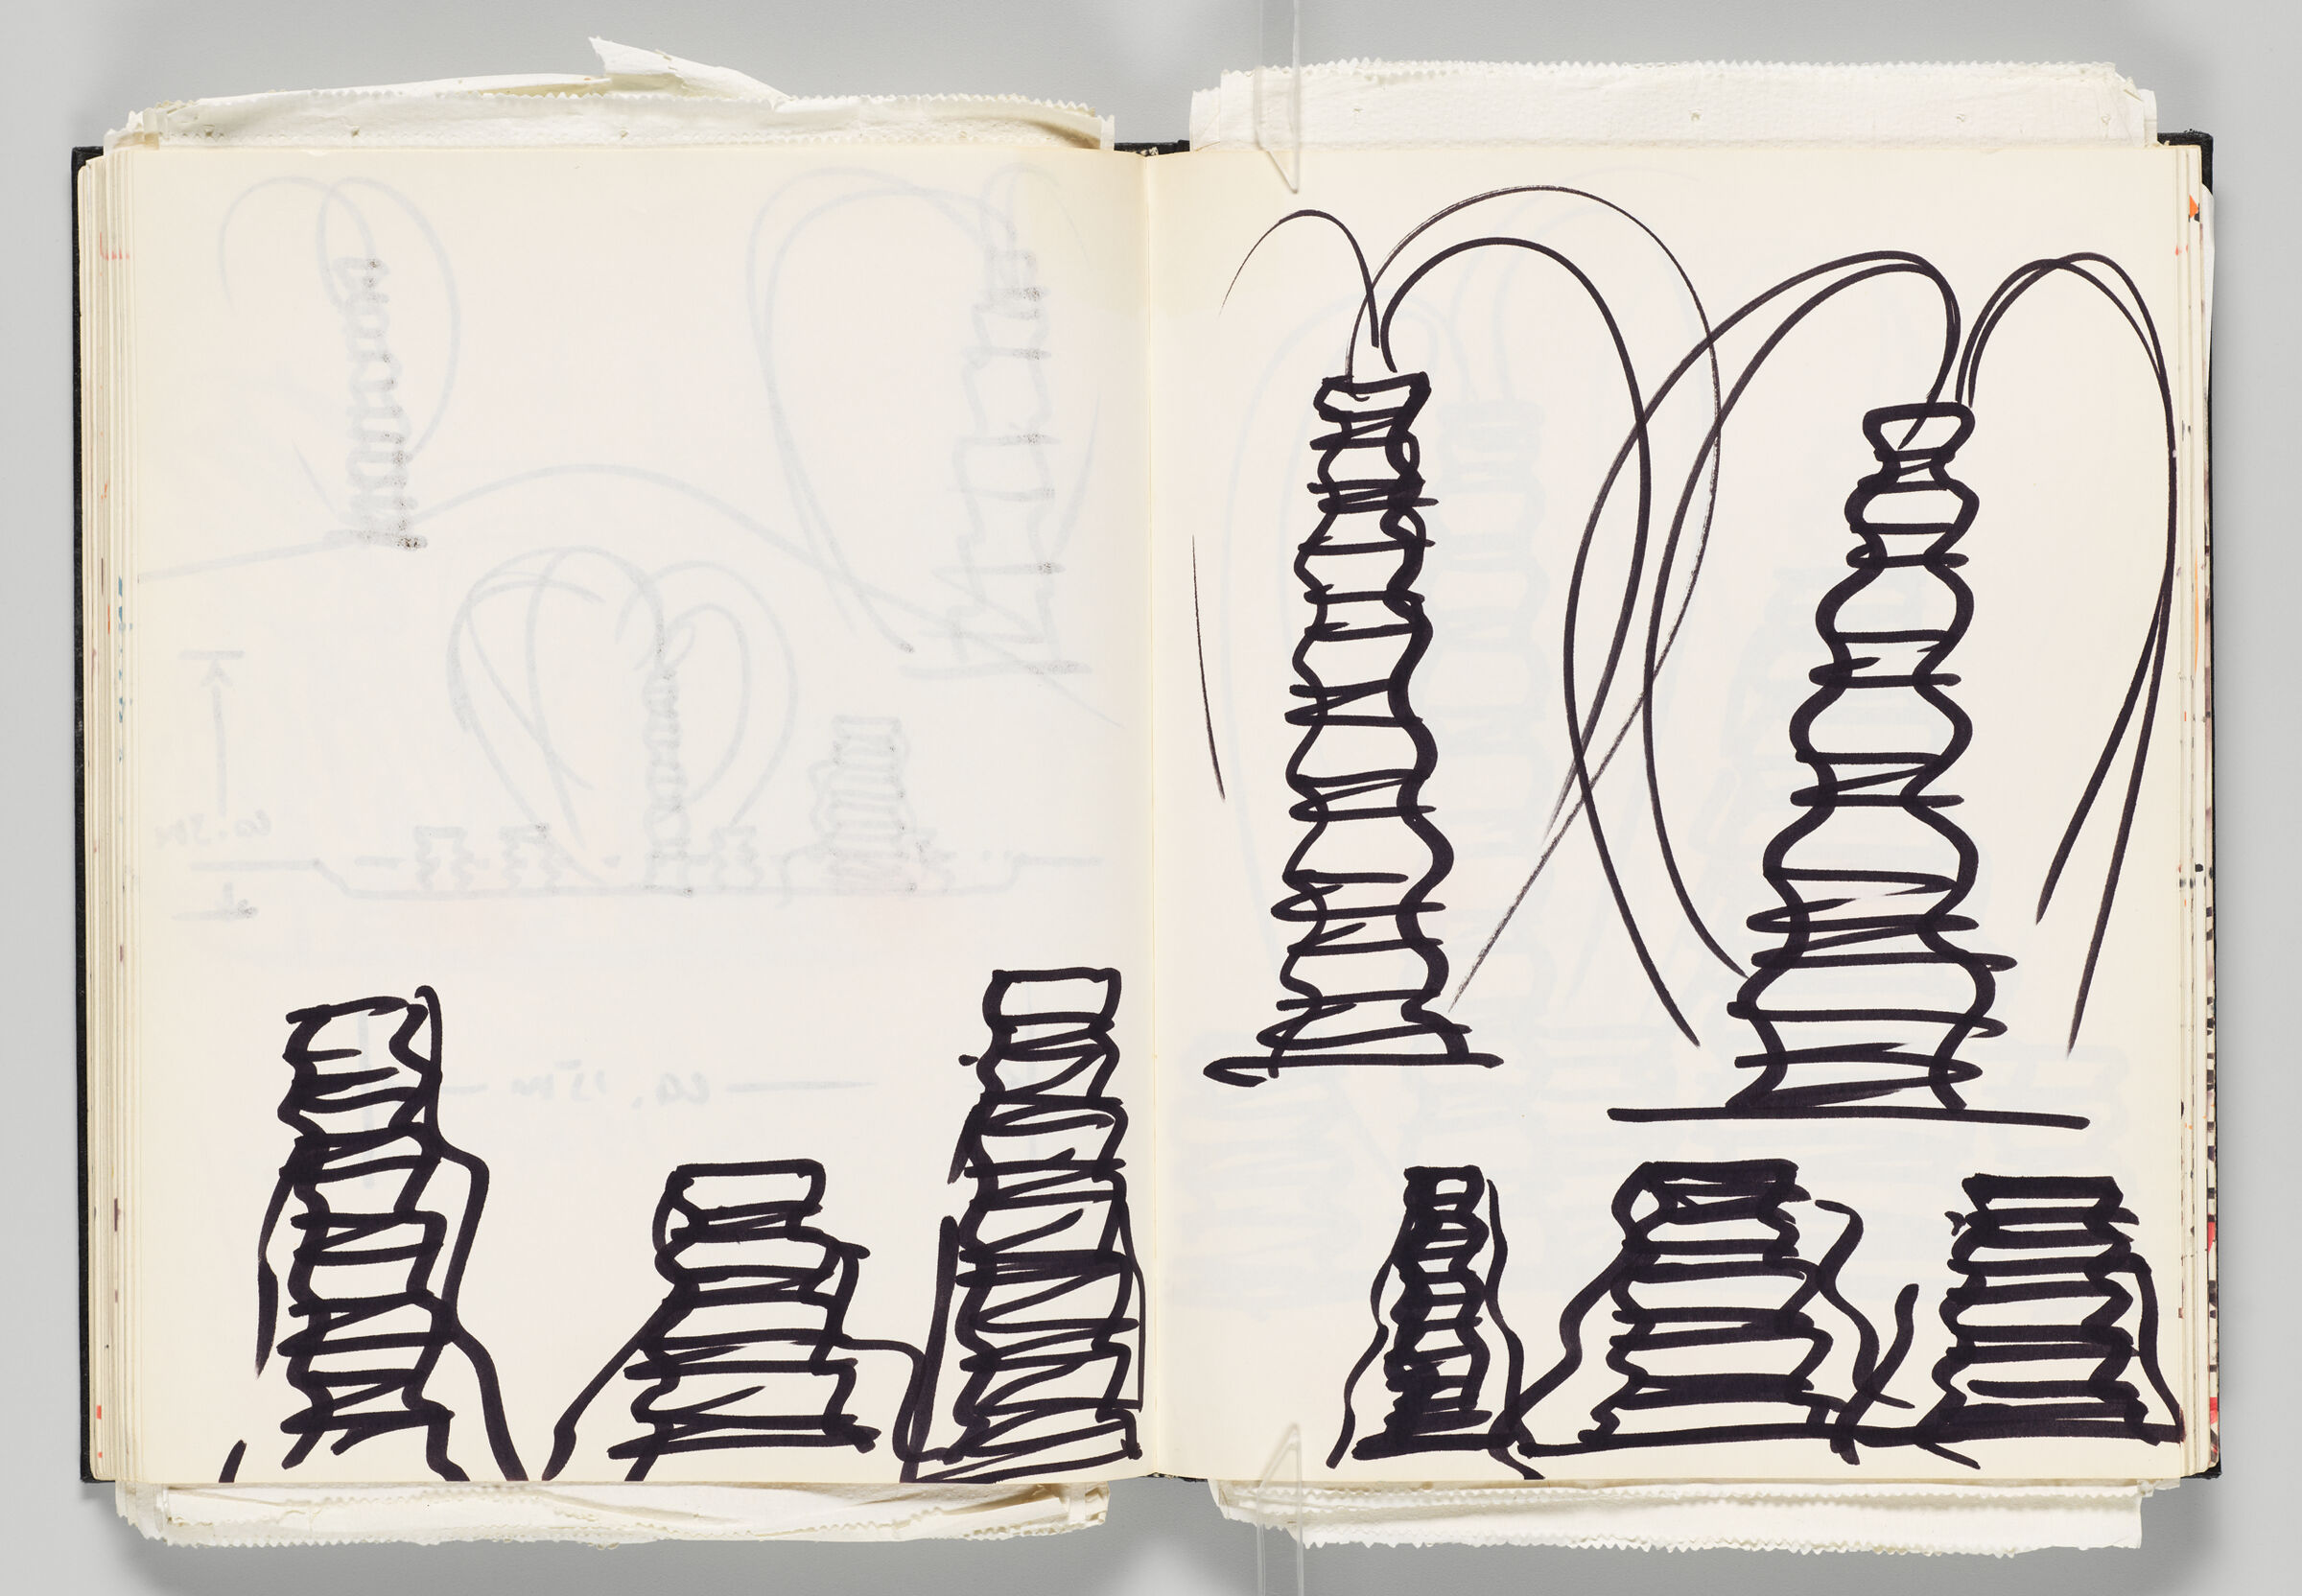 Untitled (Fountain Designs And Bleed-Through Of Previous Page, Left Page); Untitled (Fountain Designs, Right Page)